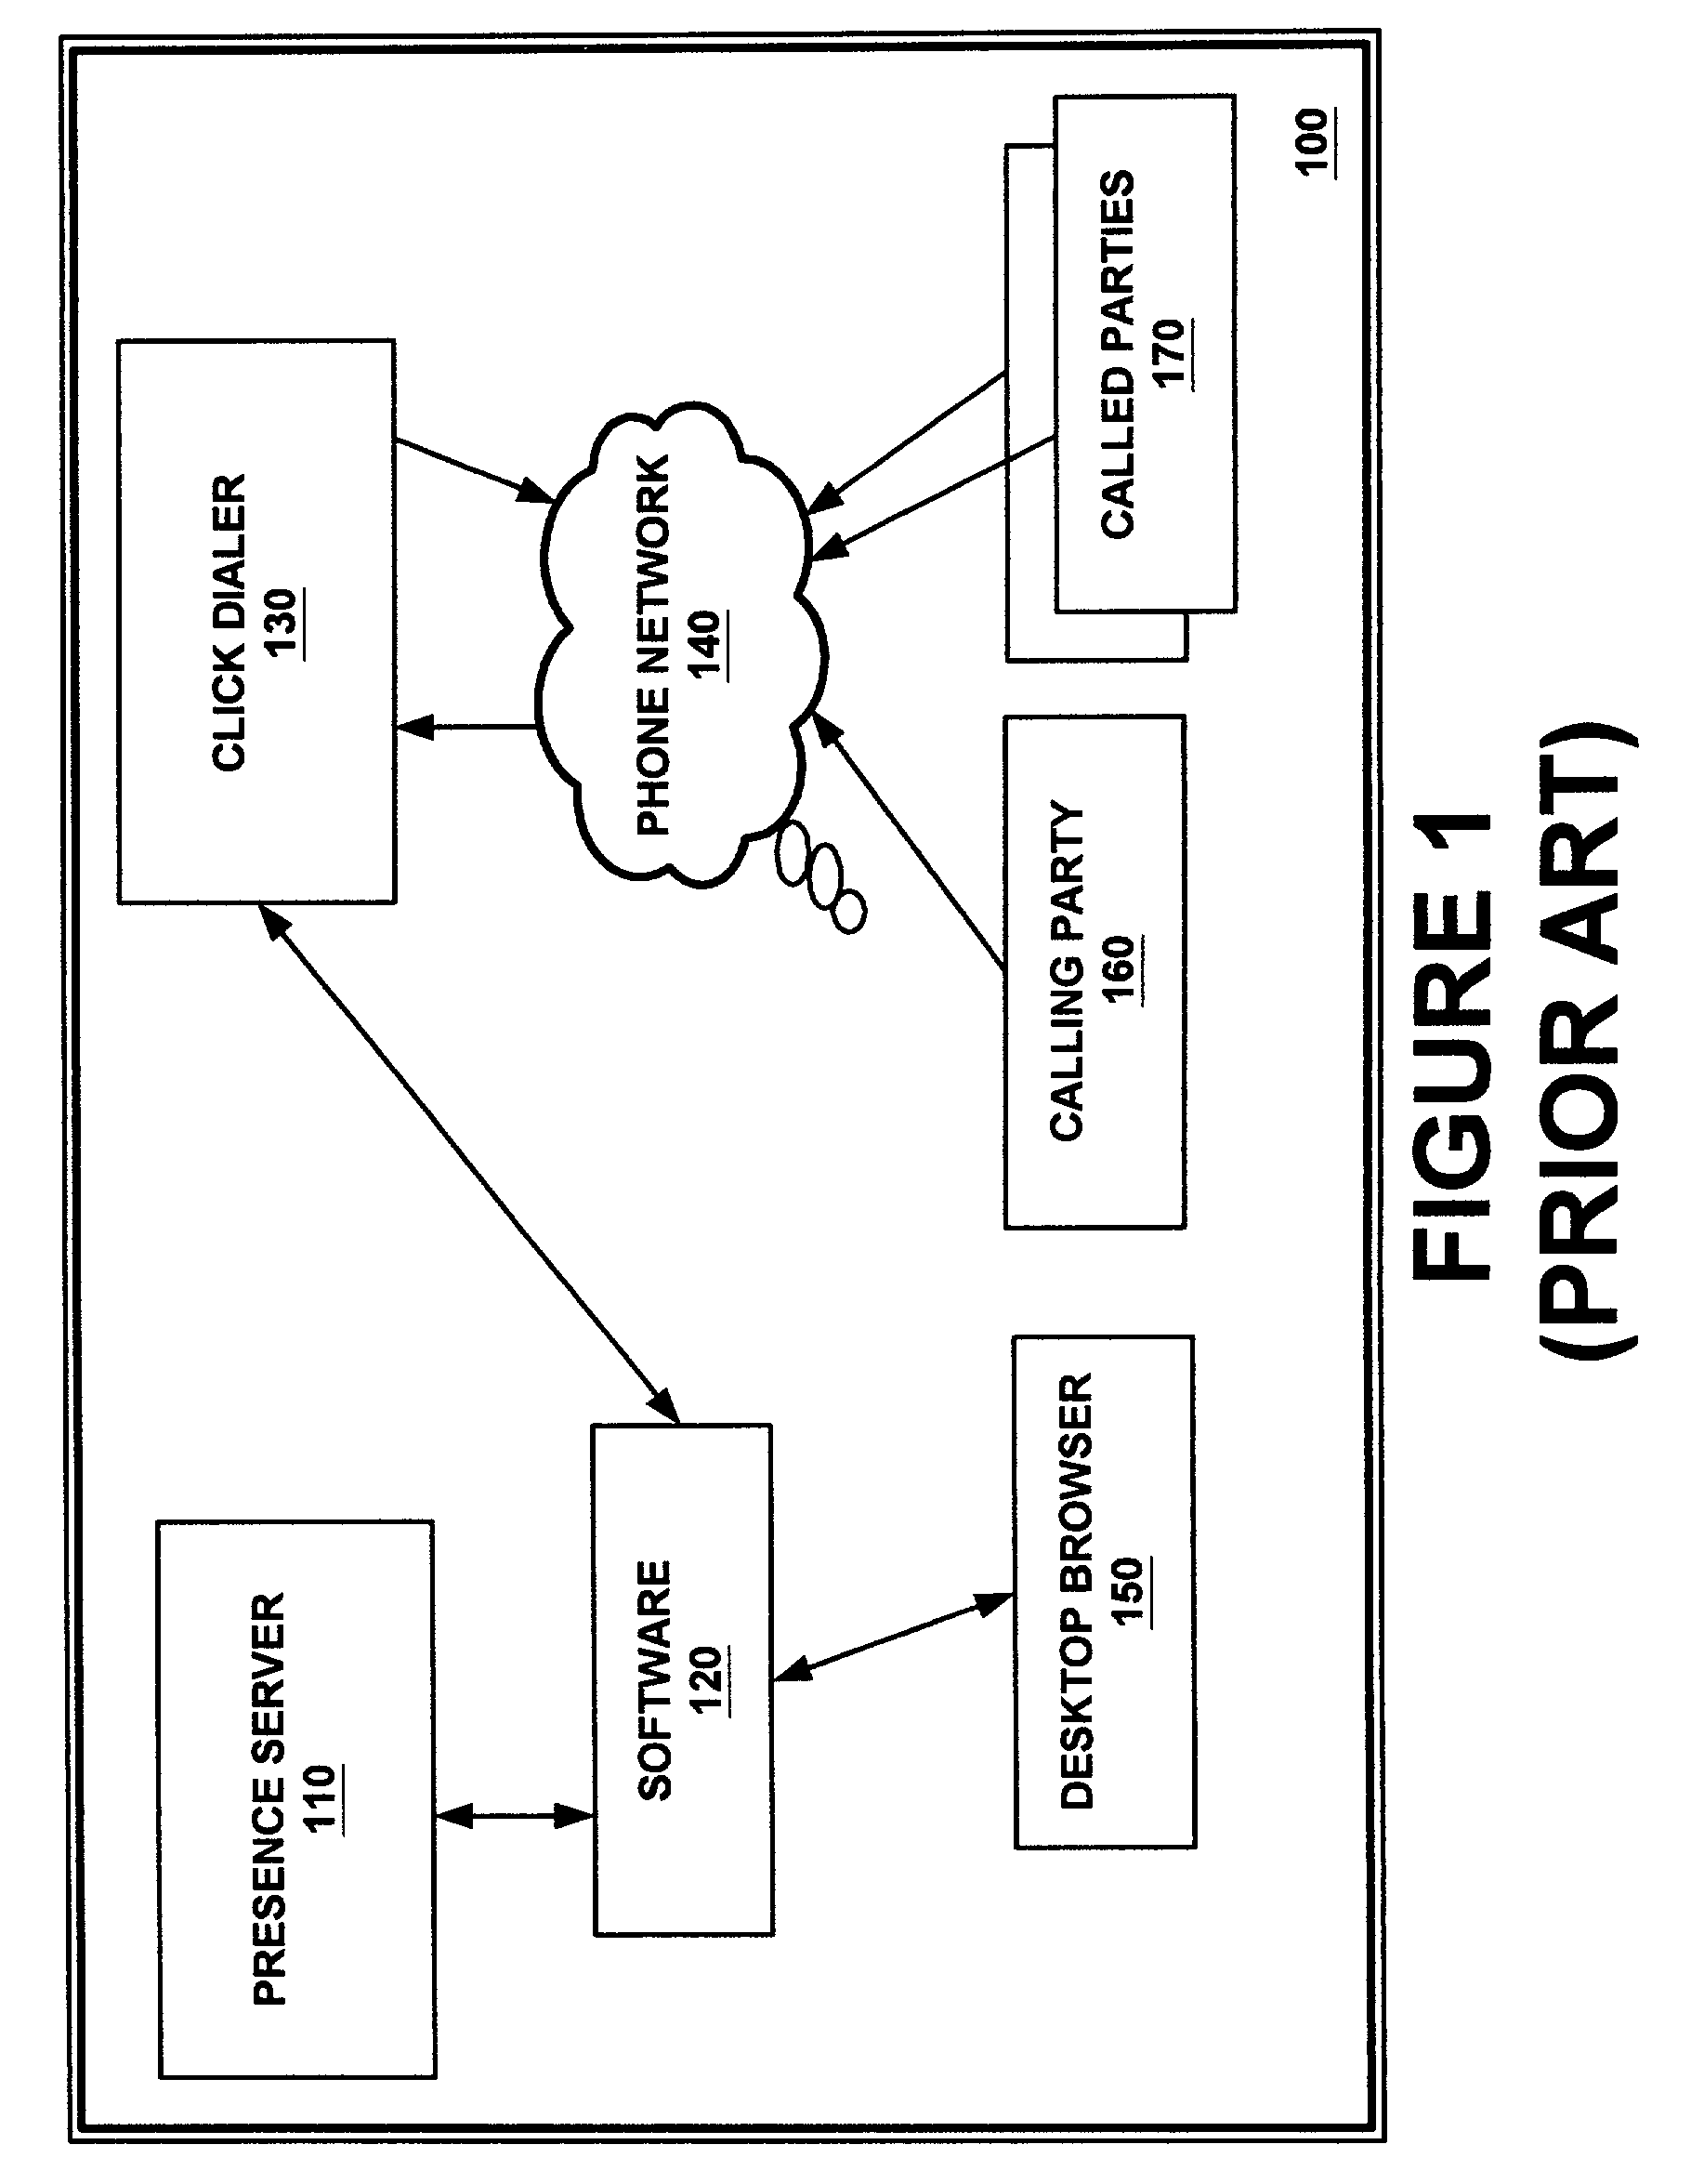 System and method of using presence information to delay dialing phone calls initiated by a caller to a callee